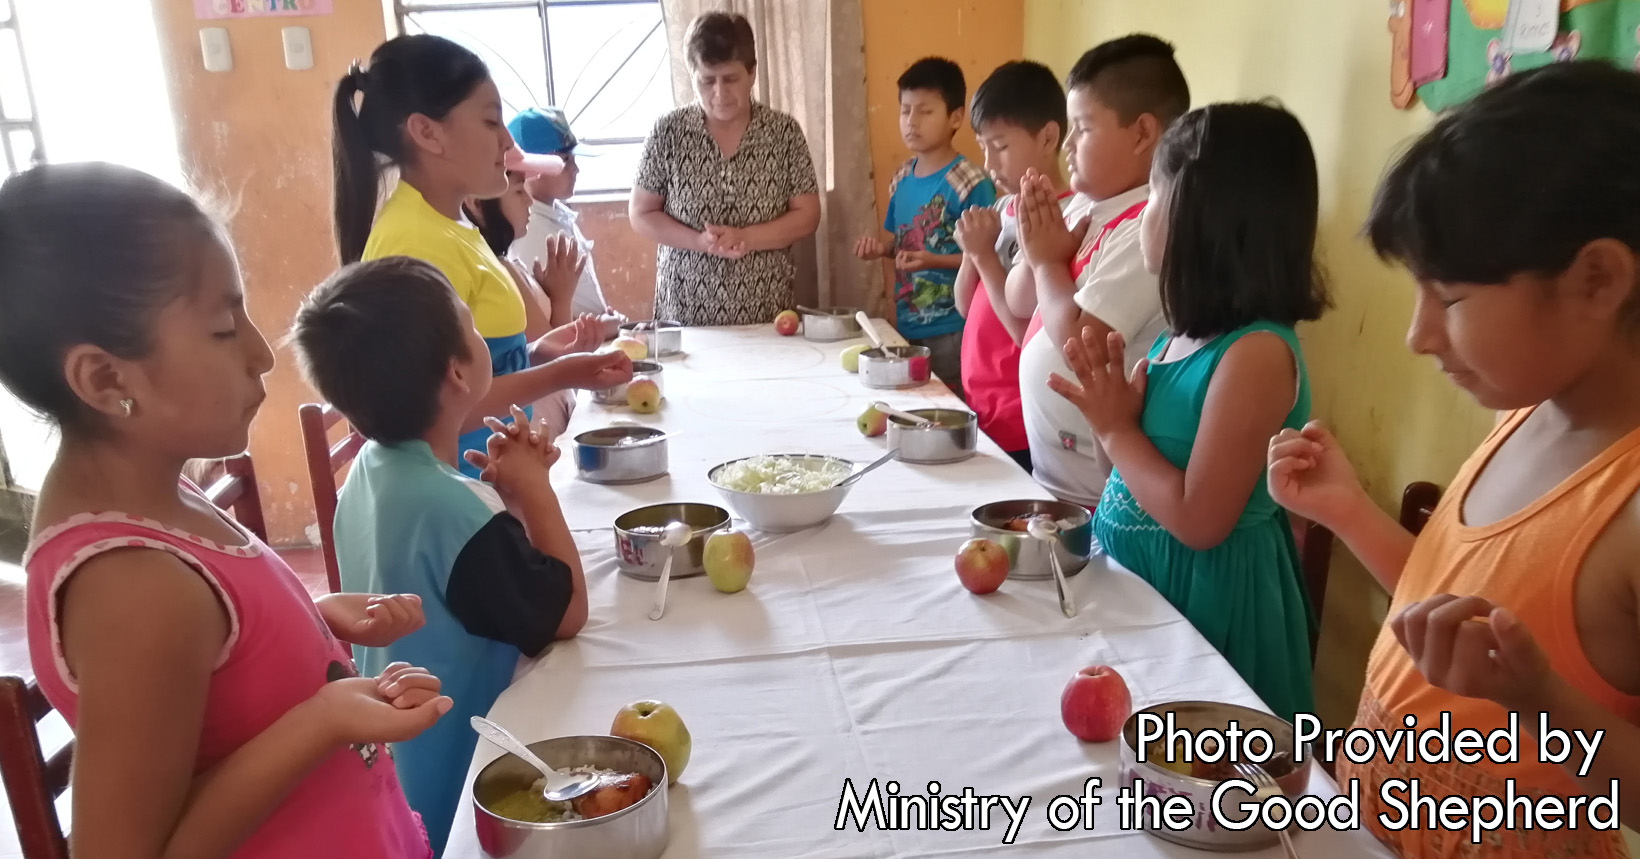 Before all the kids eat their lunch, they stand up and give thanks. The Ministry of the Good Shepard makes sure that the young kids never forget to be grateful for what they have.